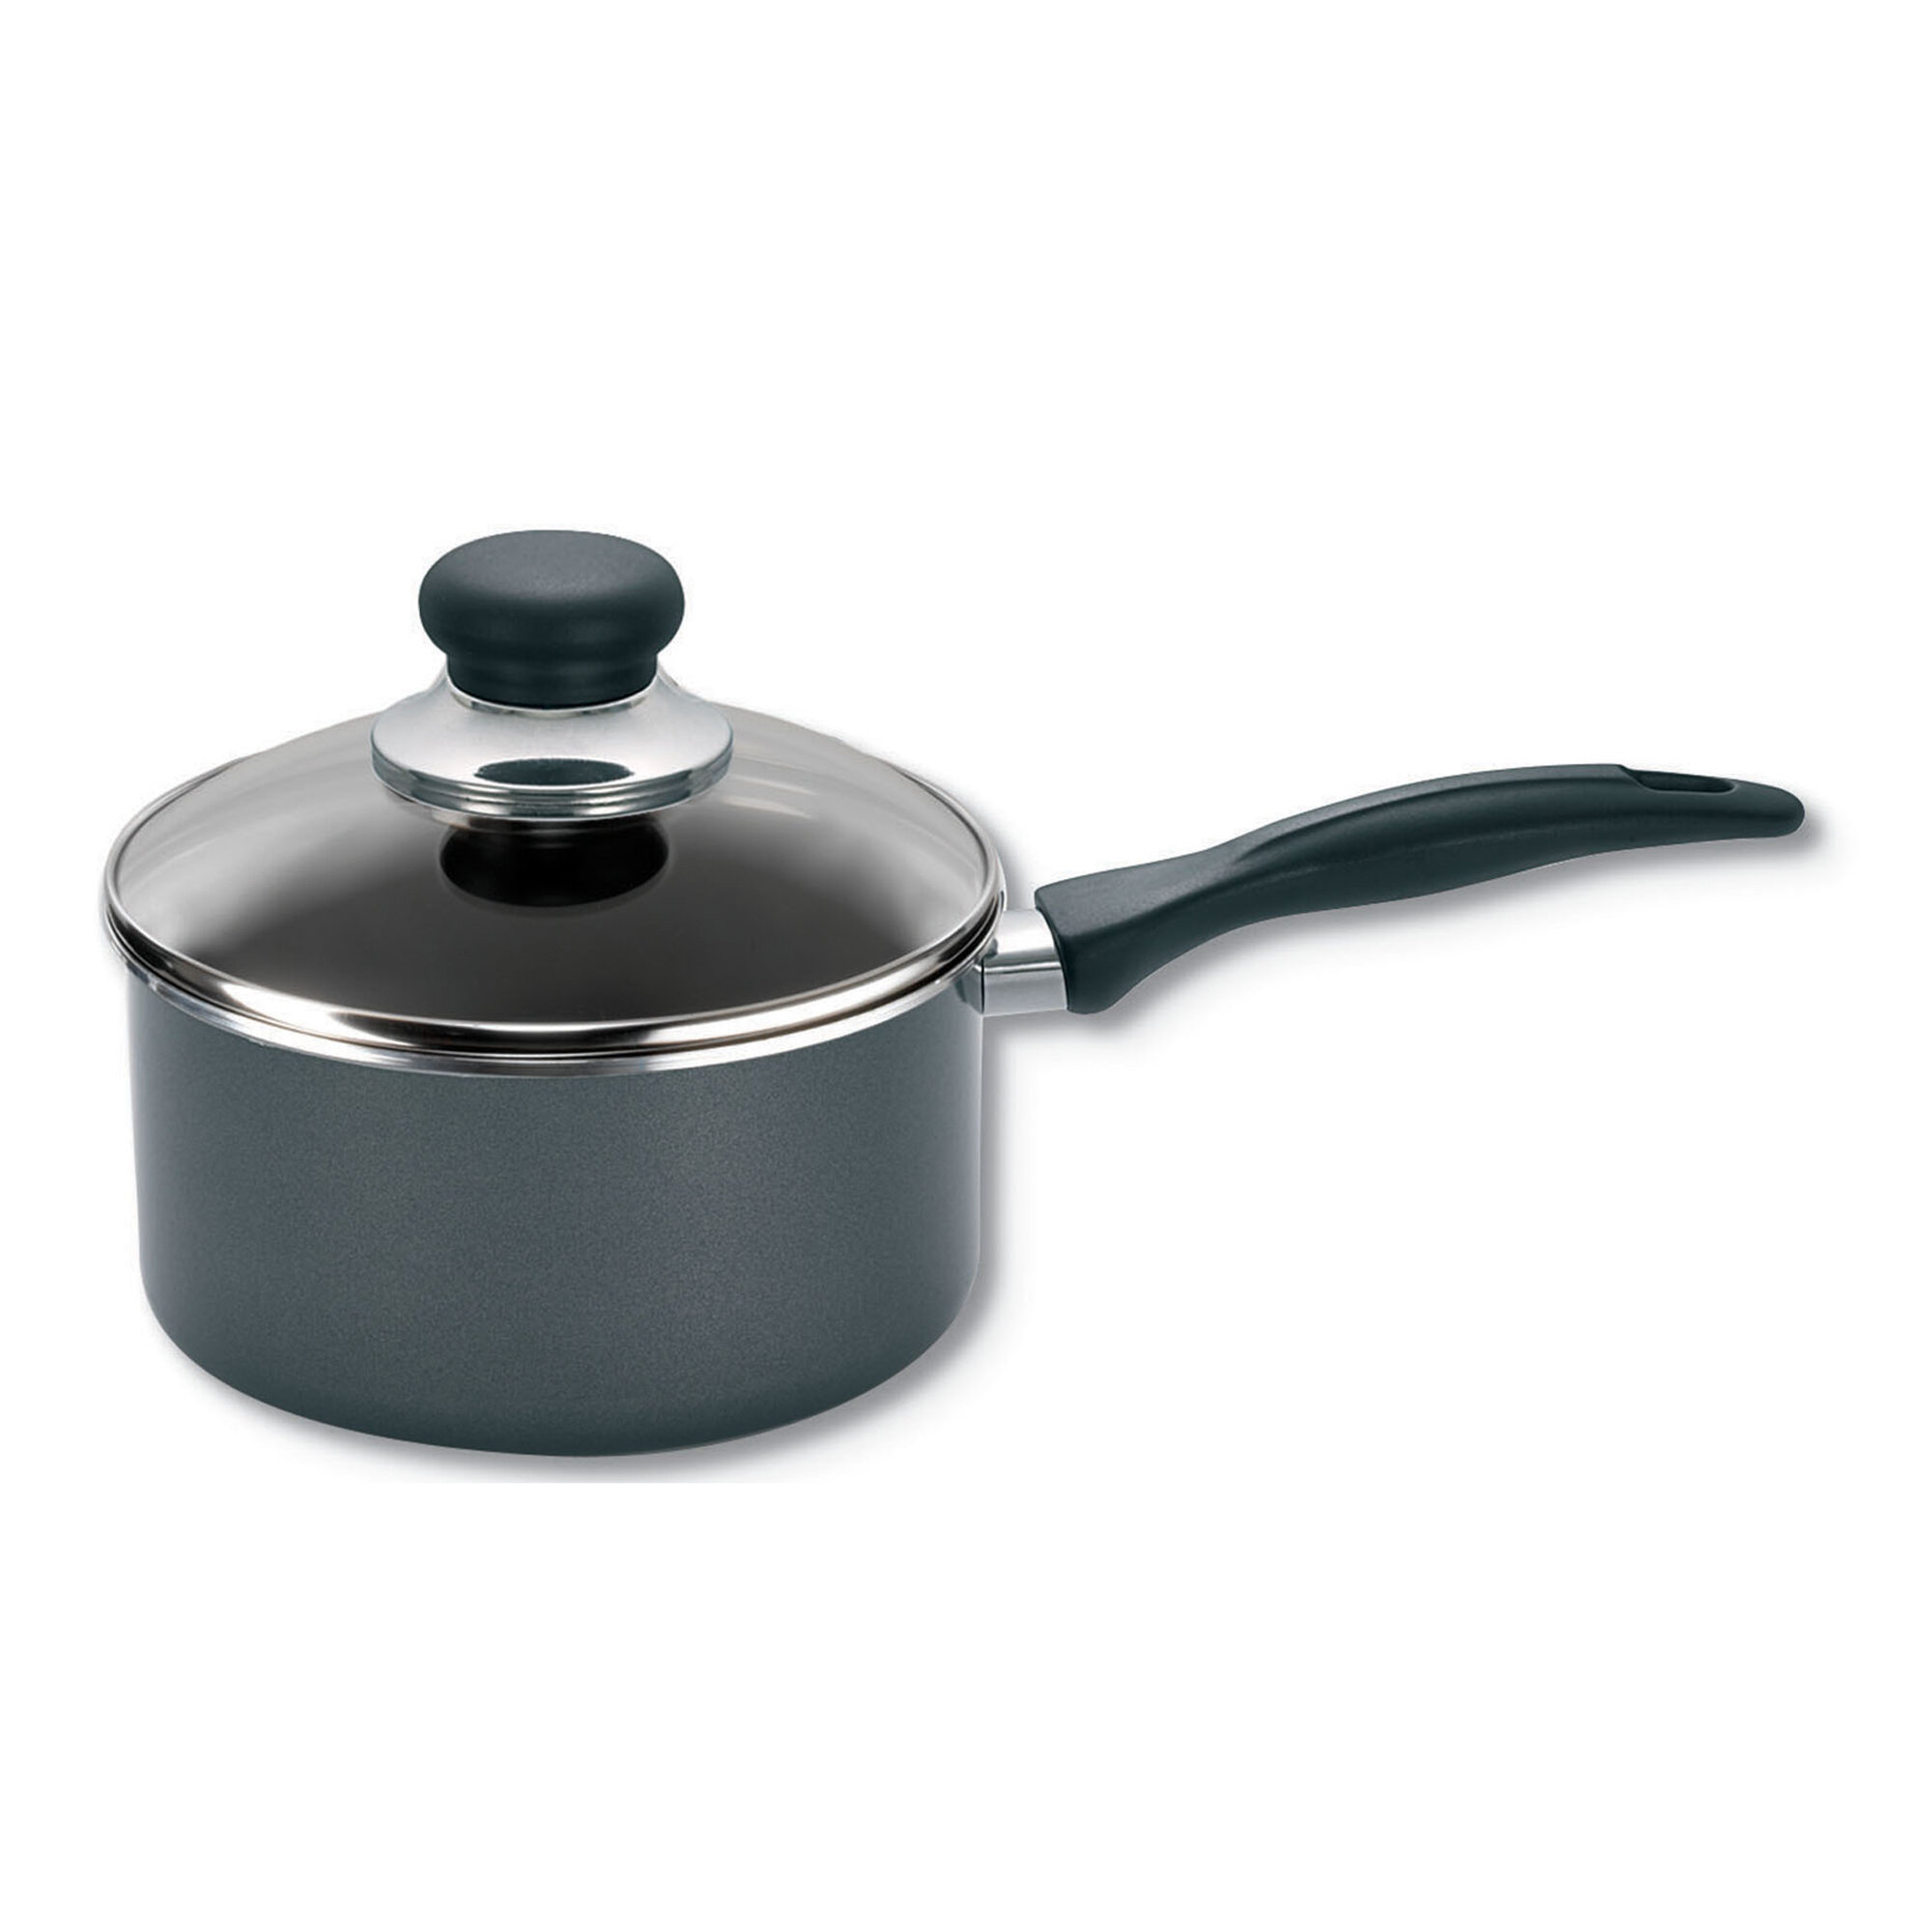 T-fal Easy Care Nonstick Stockpot with lid, 12 quart